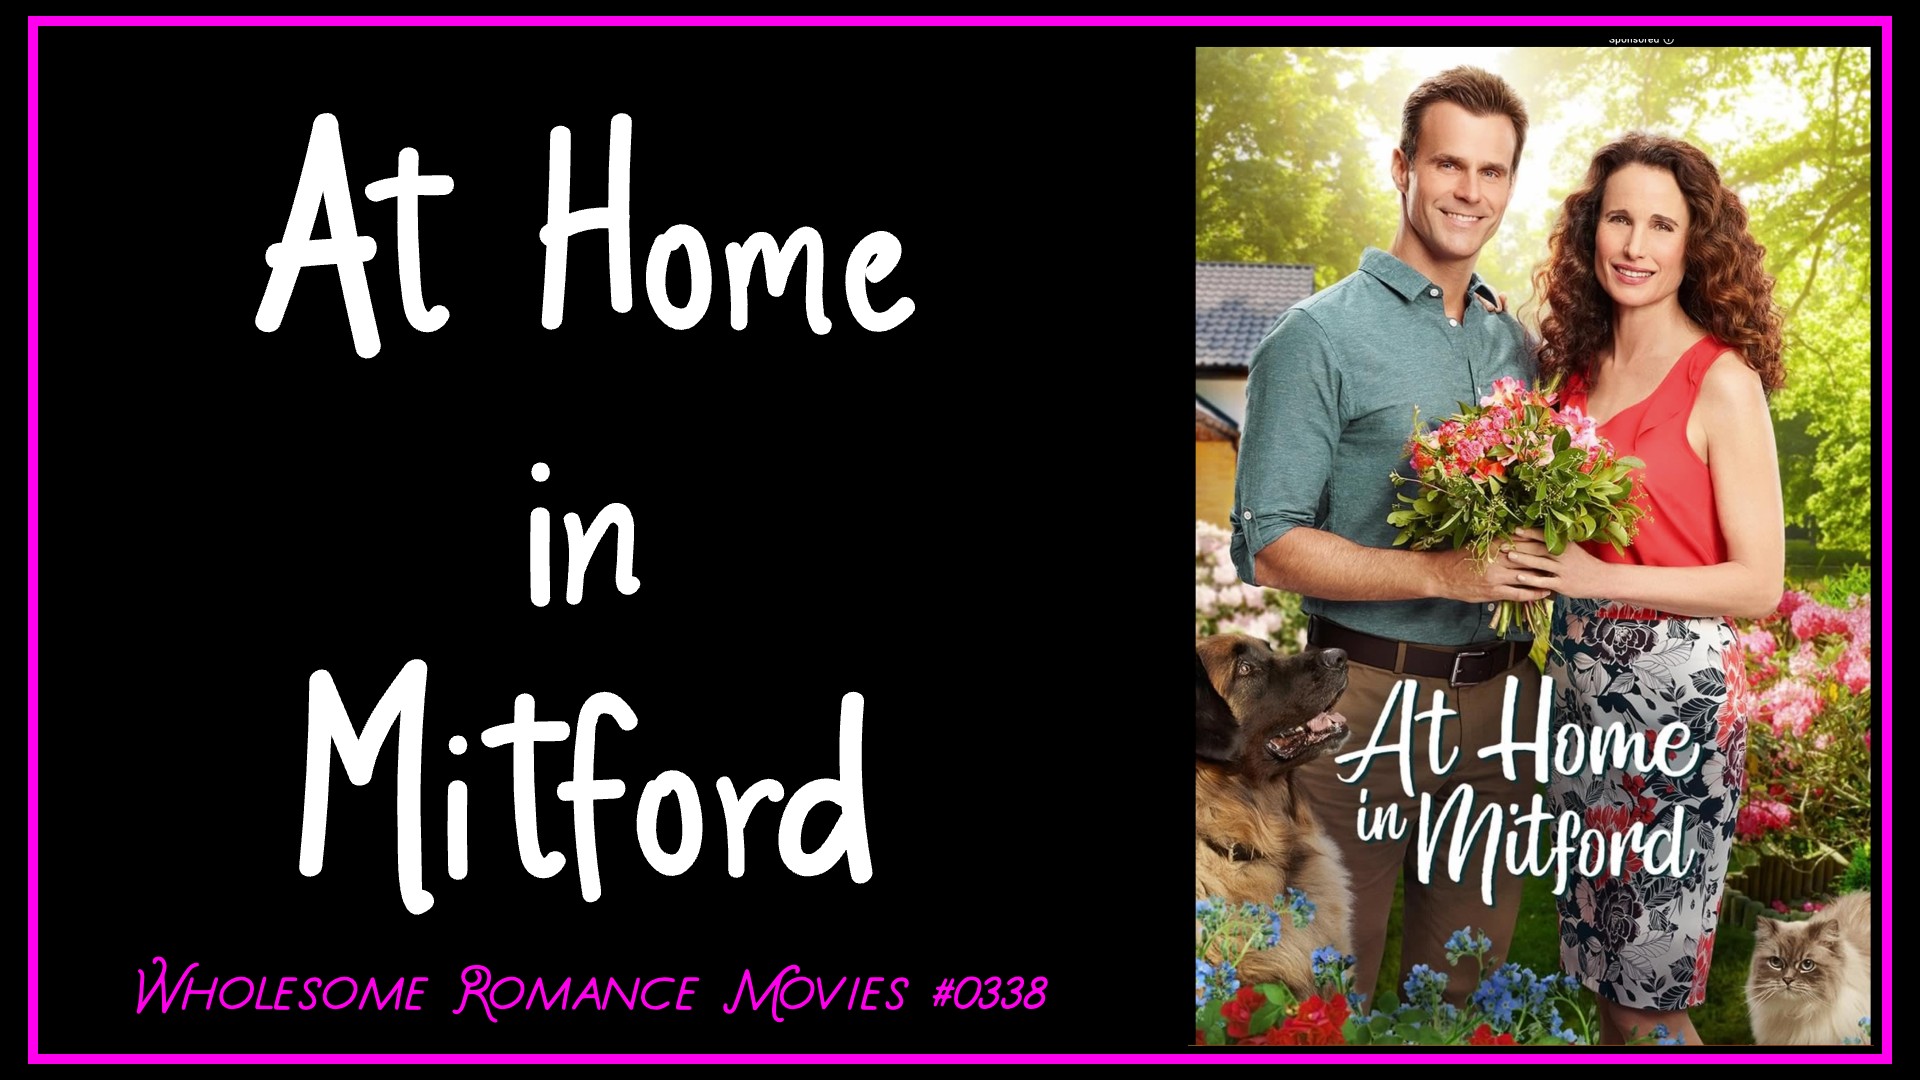 At Home in Mitford (2017) WRM Review